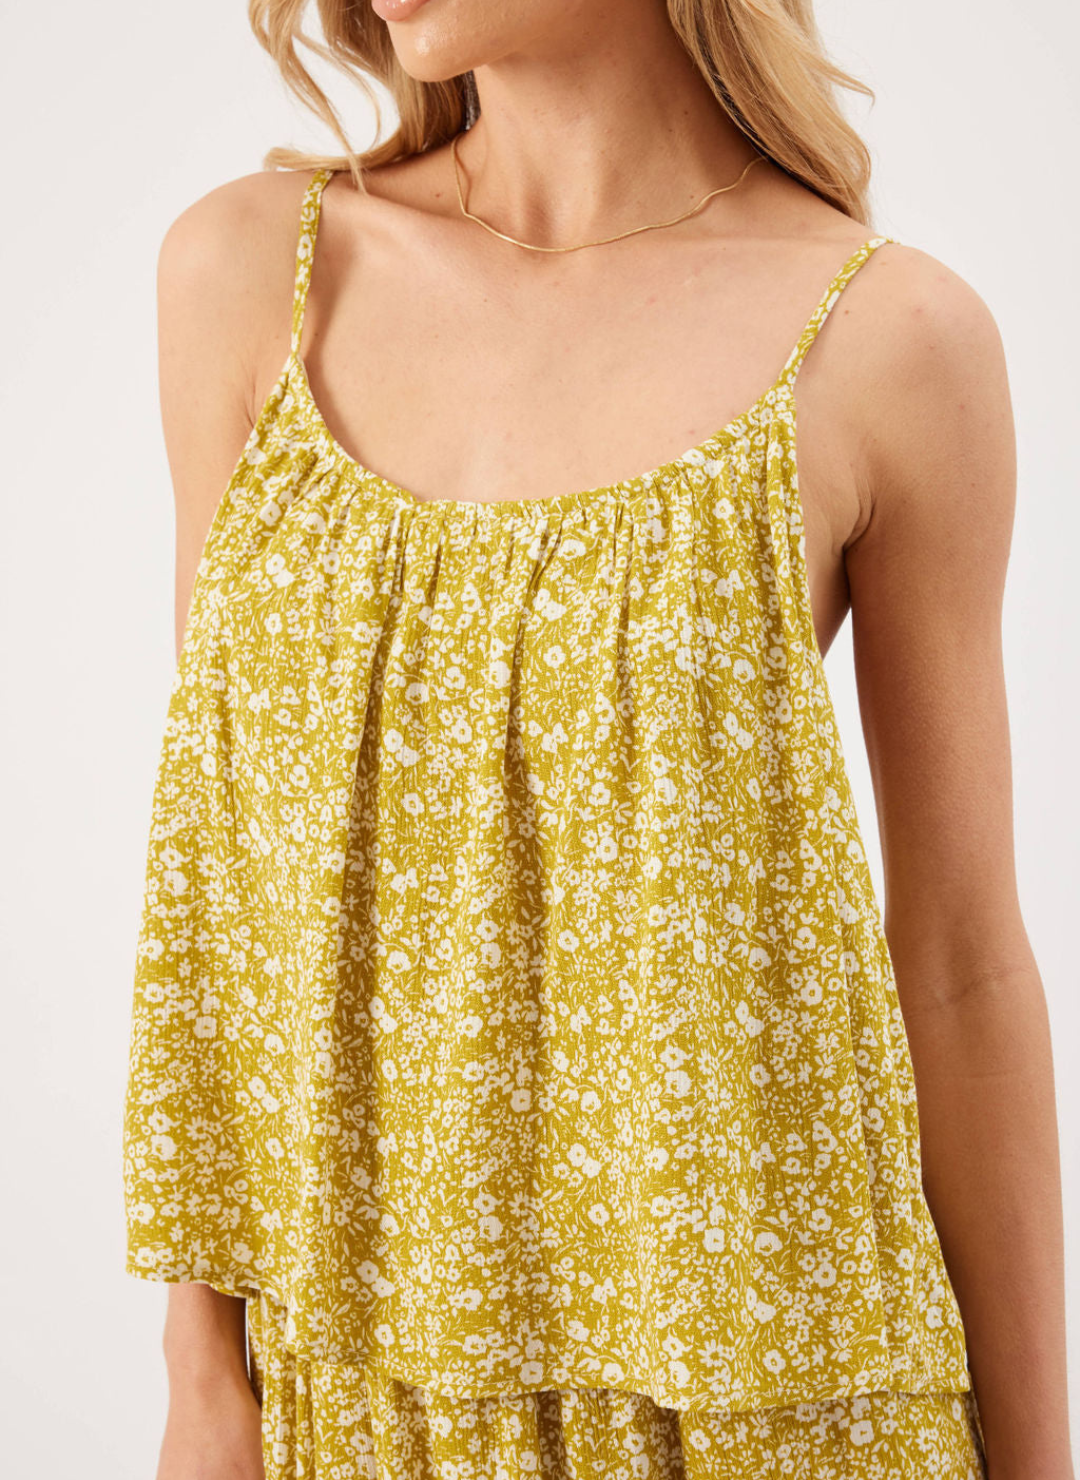 Model wearing Finley Floral Tank with ditsy white floral detailing, curved neckline, and adjustable straps.